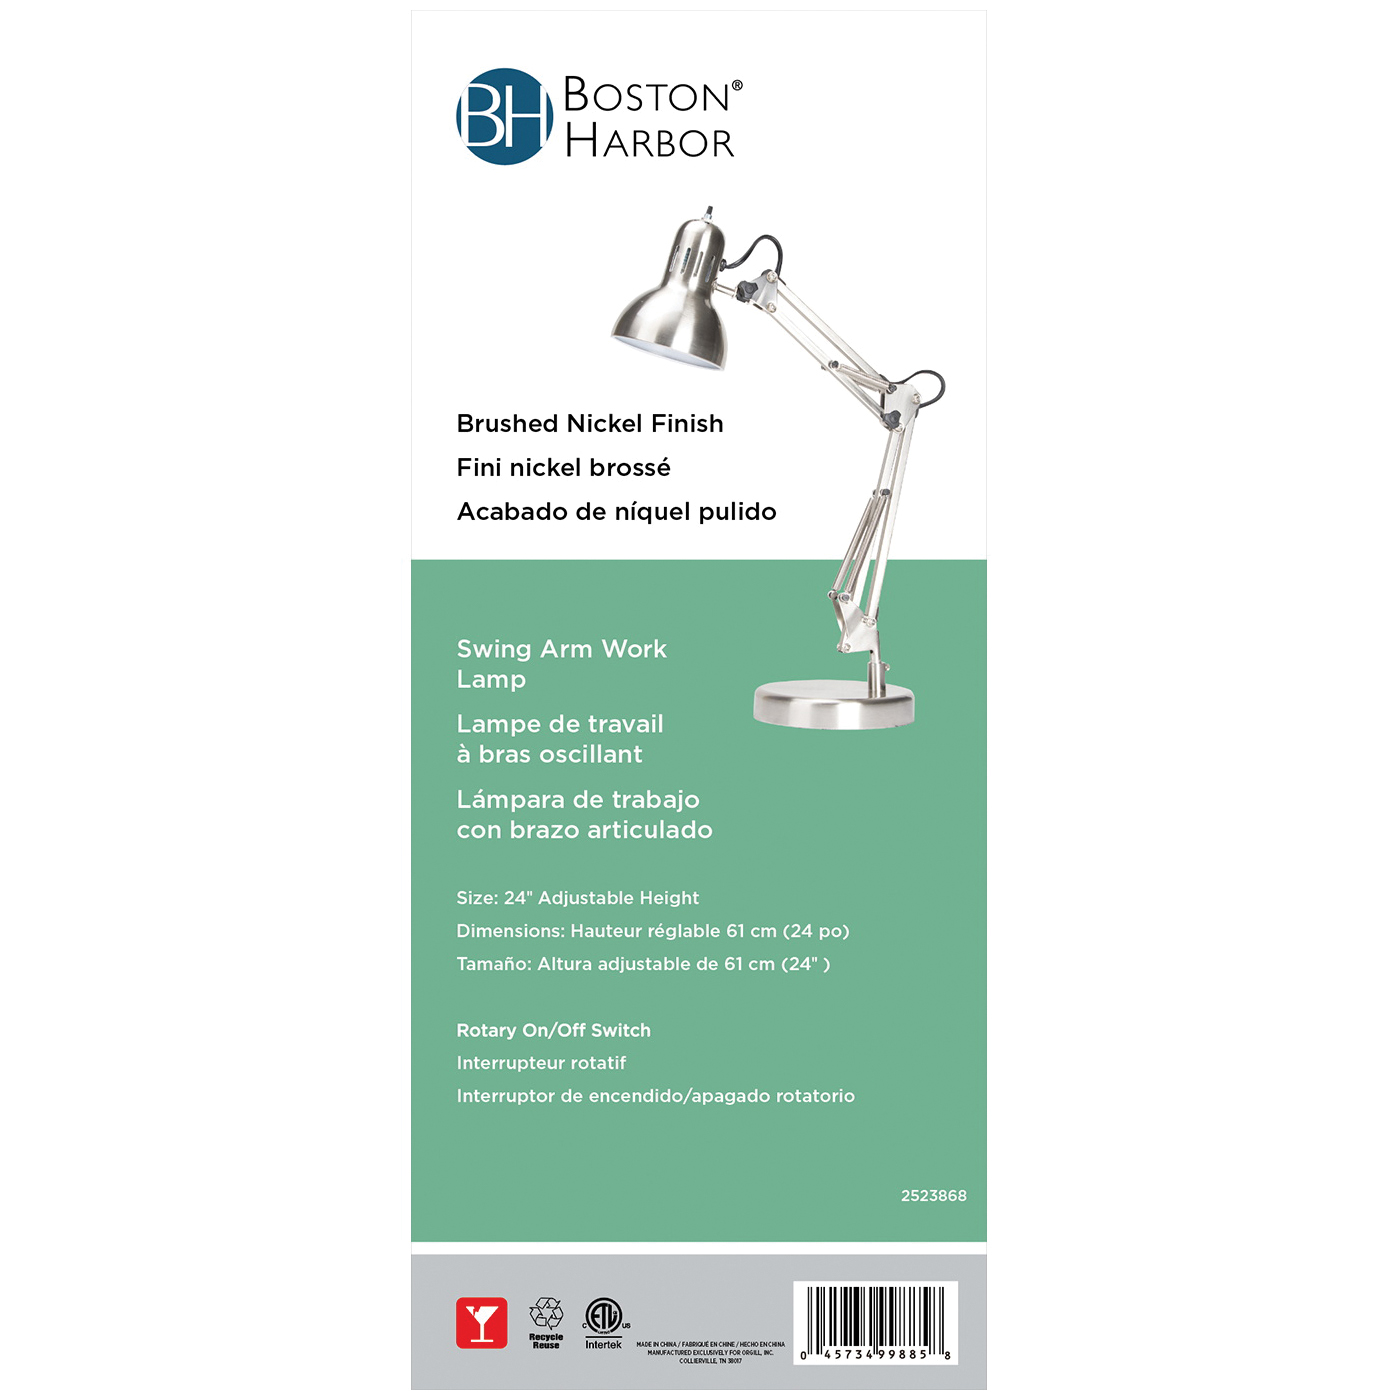 Boston Harbor WK-618E-3L Swing Arm Work Lamp, 120 V, 60 W, 1-Lamp, A19 or CFL Lamp, Brushed Nickel Finish - 3